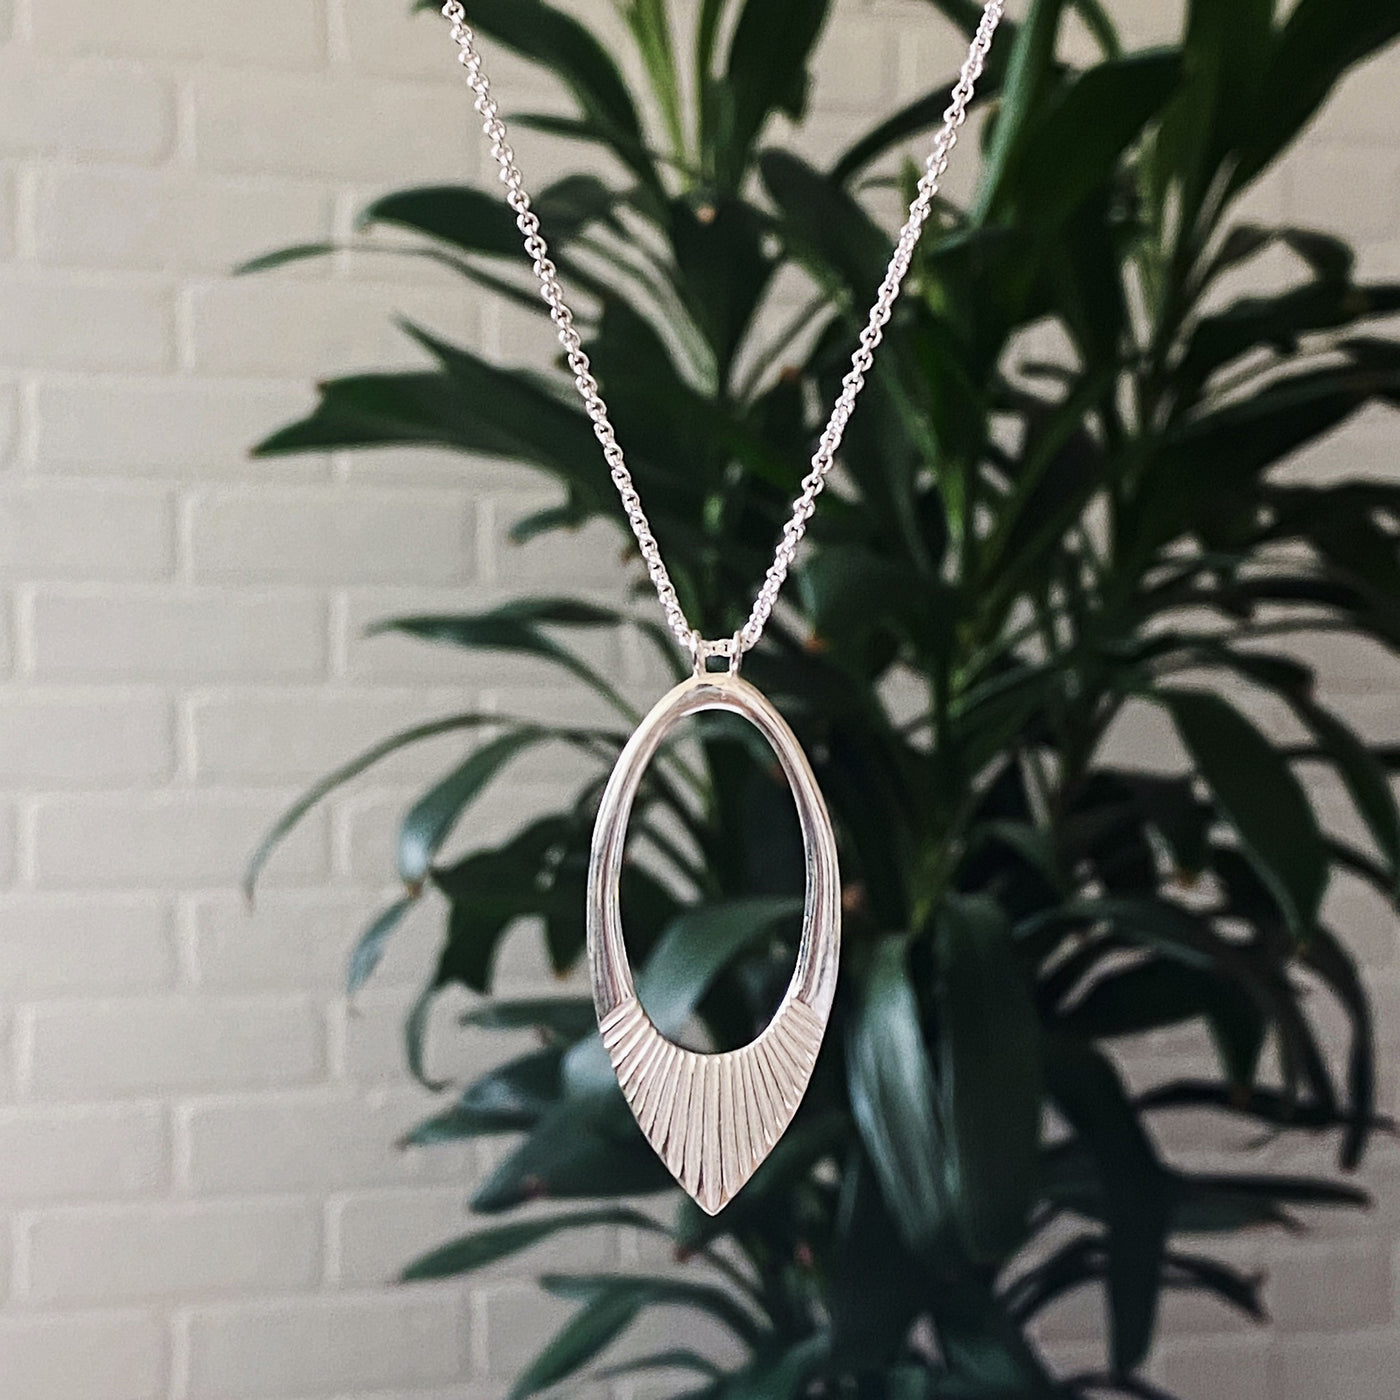 Extra long silver neckalce with large open petal shape pendant with carved ray texture across the bottom